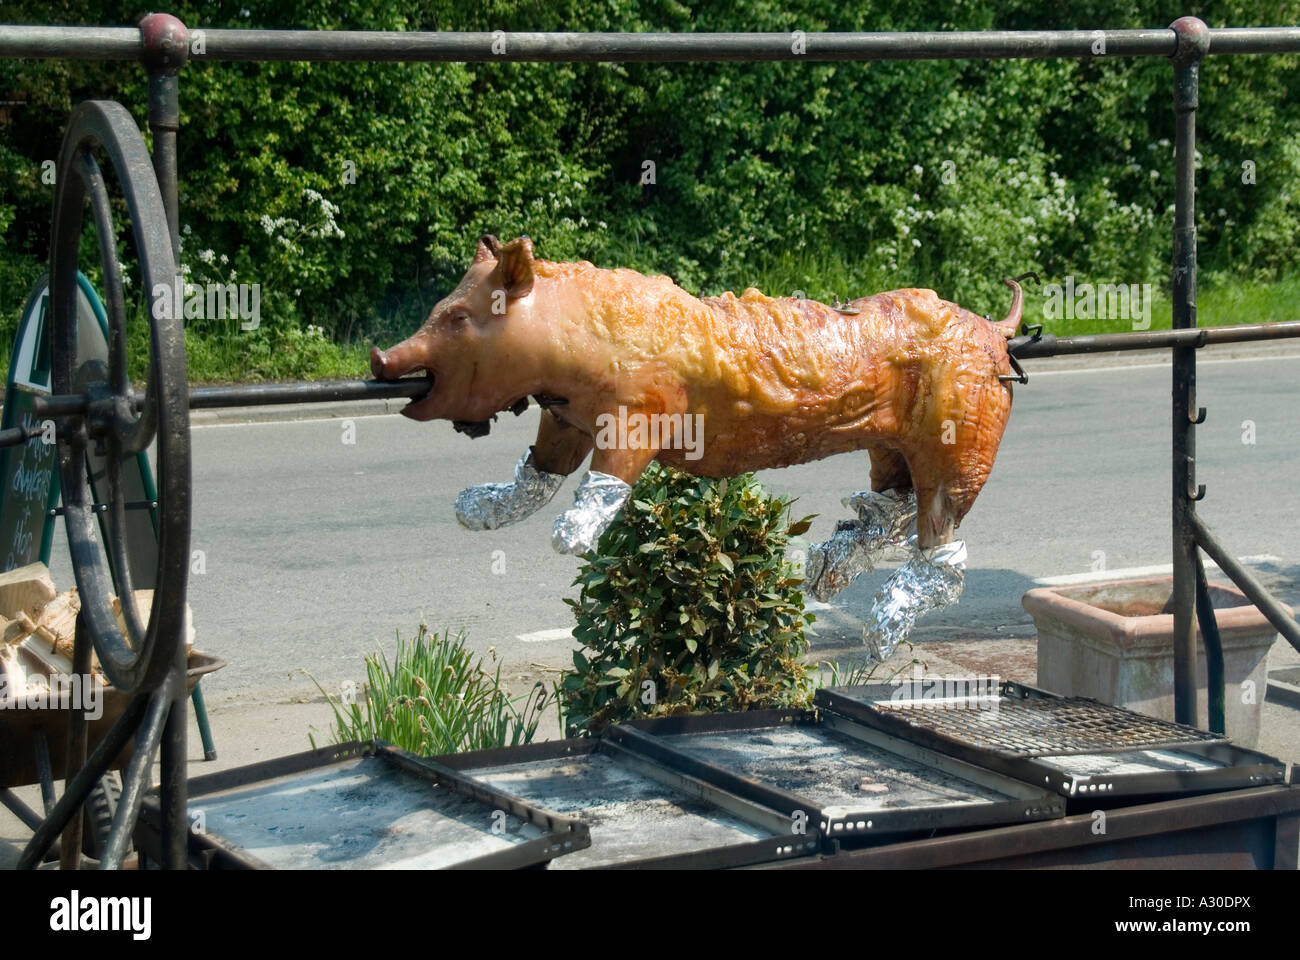 Pig carcass being roasted on traditional outdoor rotating spit in roadside forecourt at rural inn pub to be served as roast pork Essex England UK Stock Photo